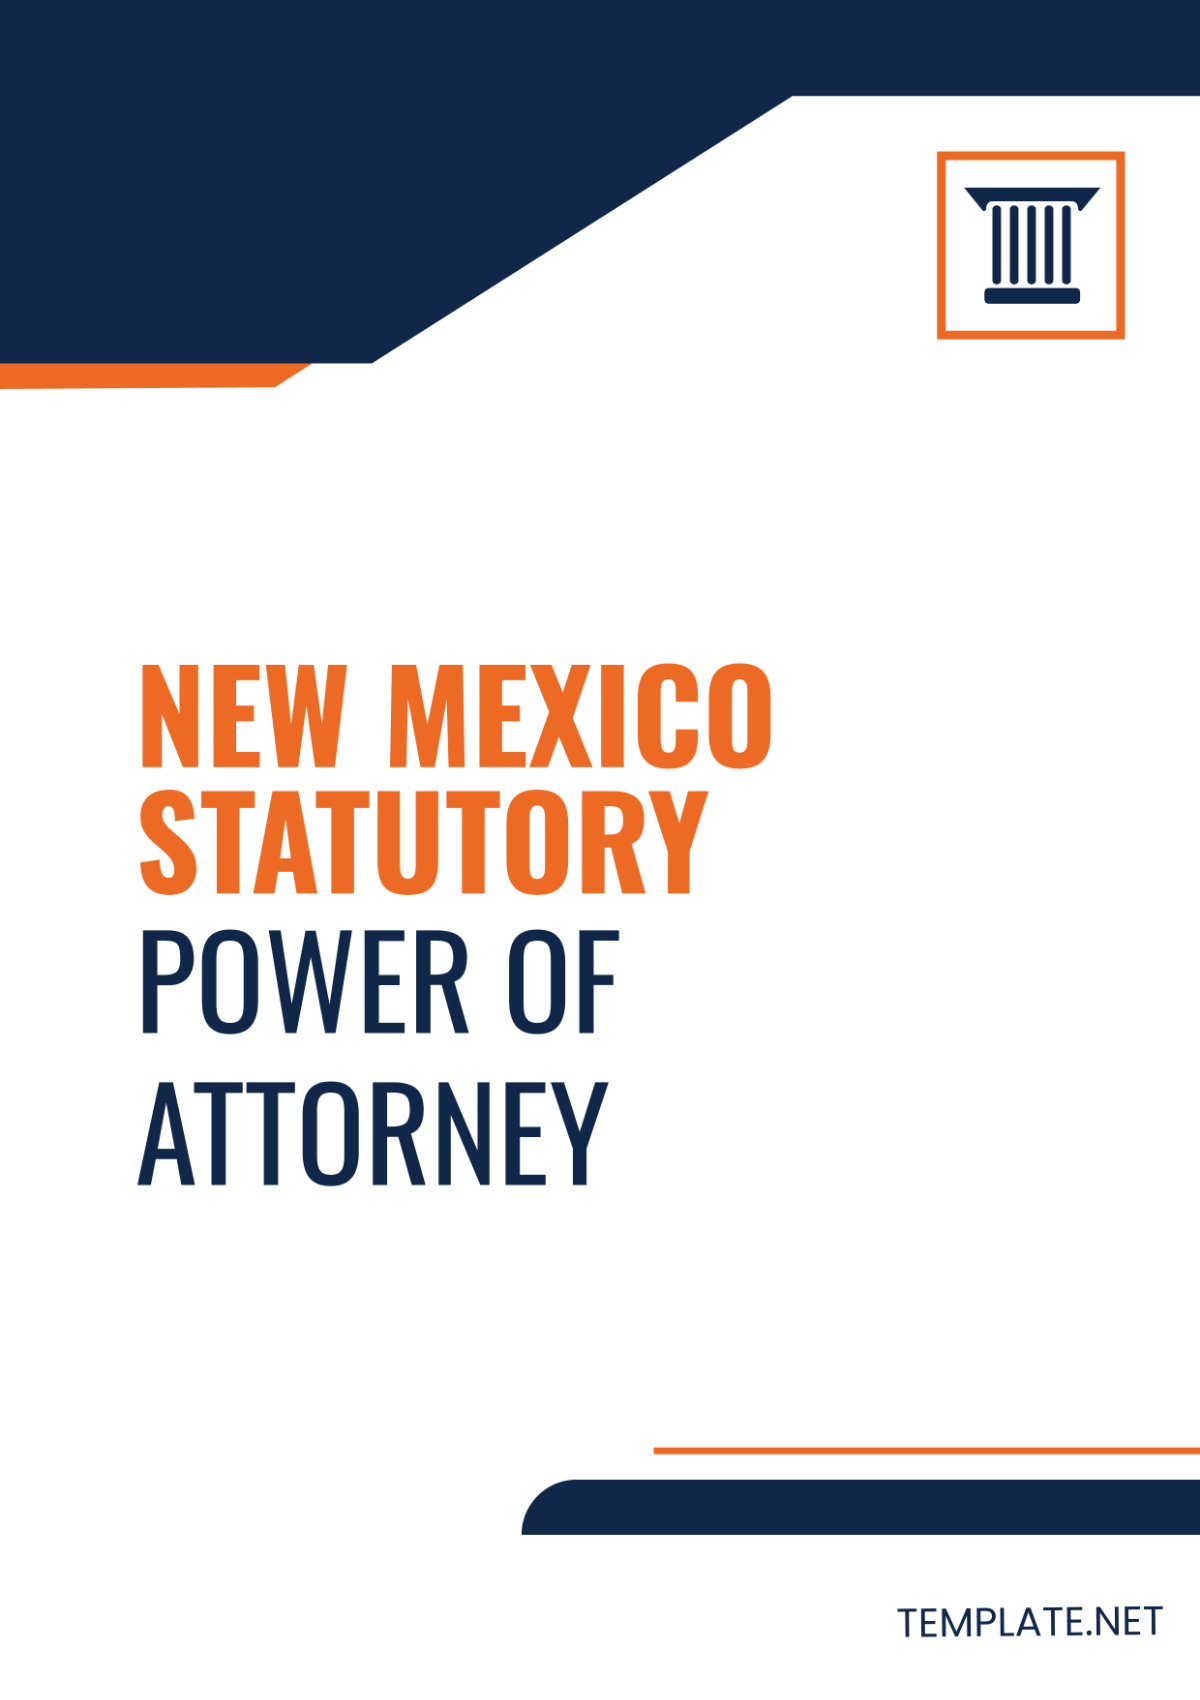 New Mexico Statutory Power of Attorney Template